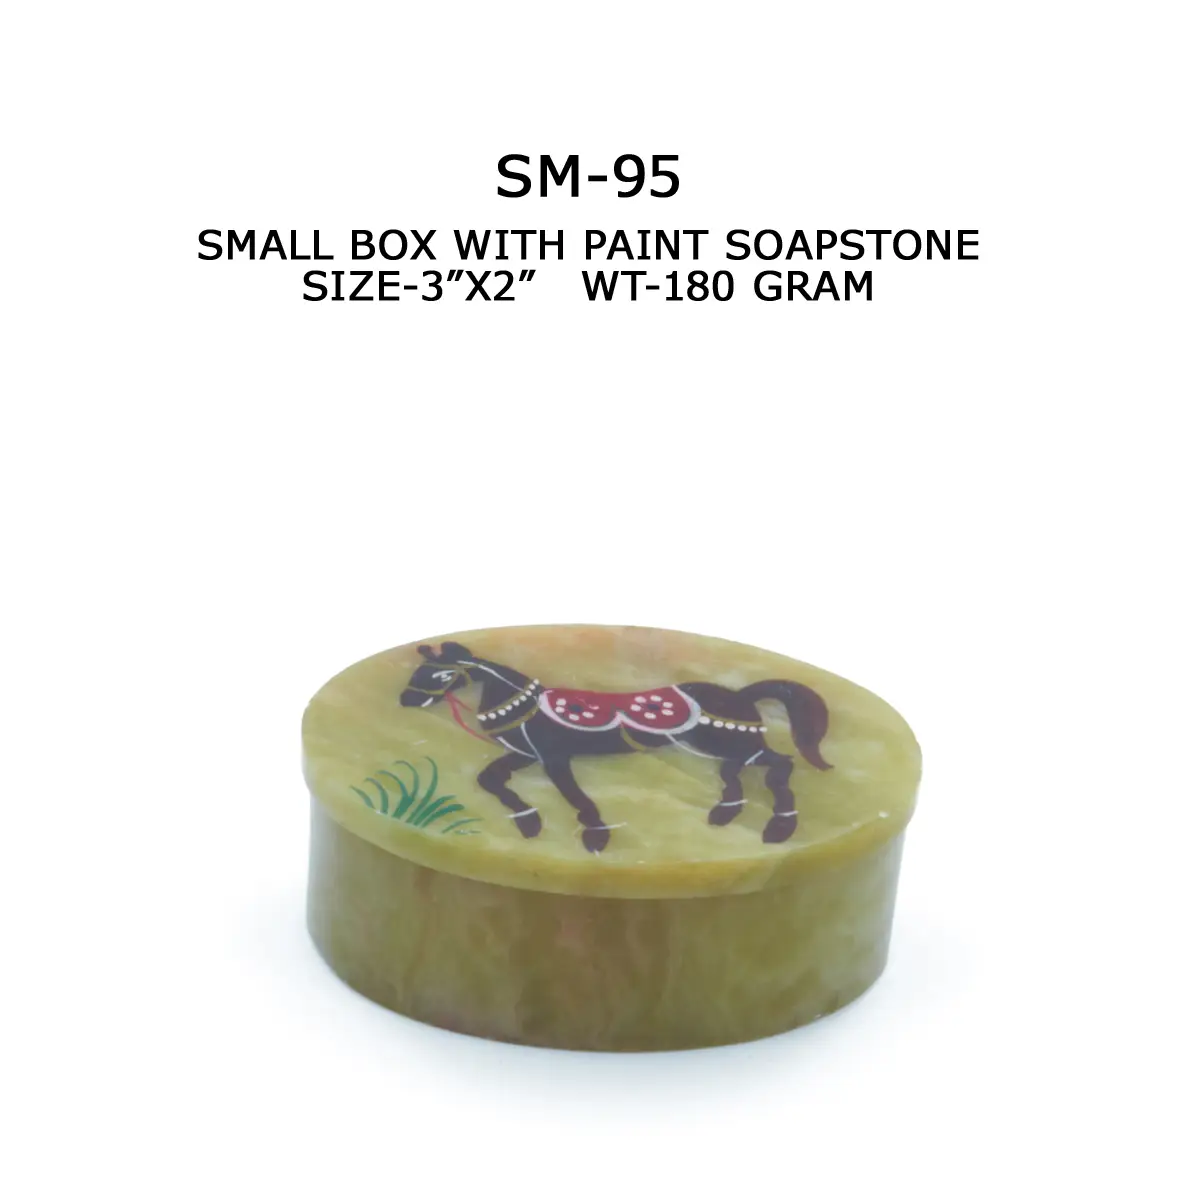 SMALL BOx WITH PAINT SOAPSTONE